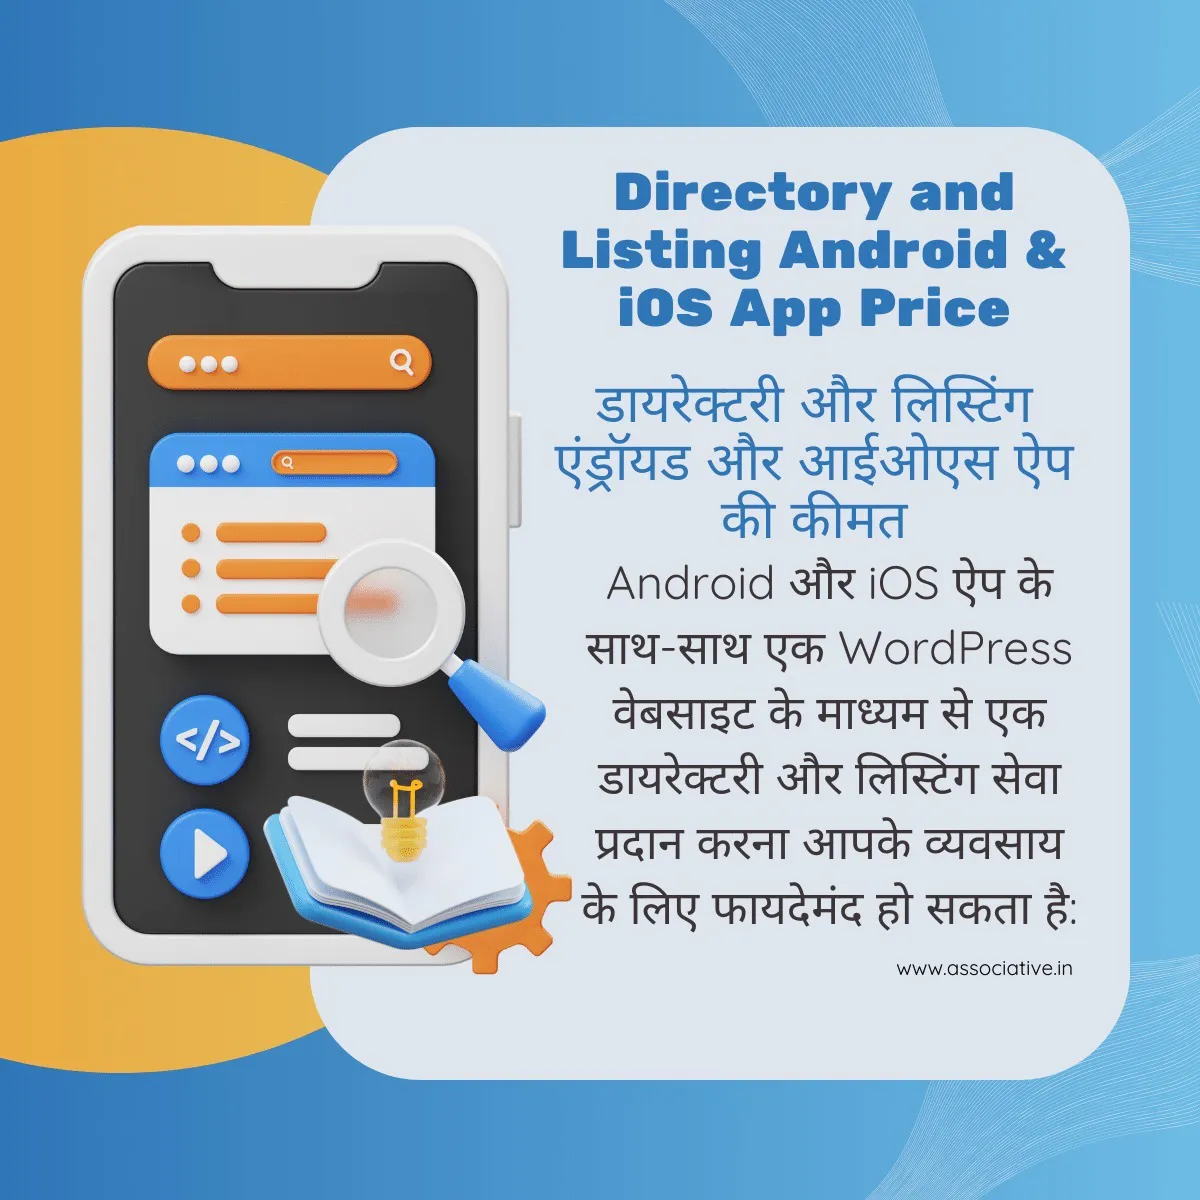 Directory and Listing Android & iOS App